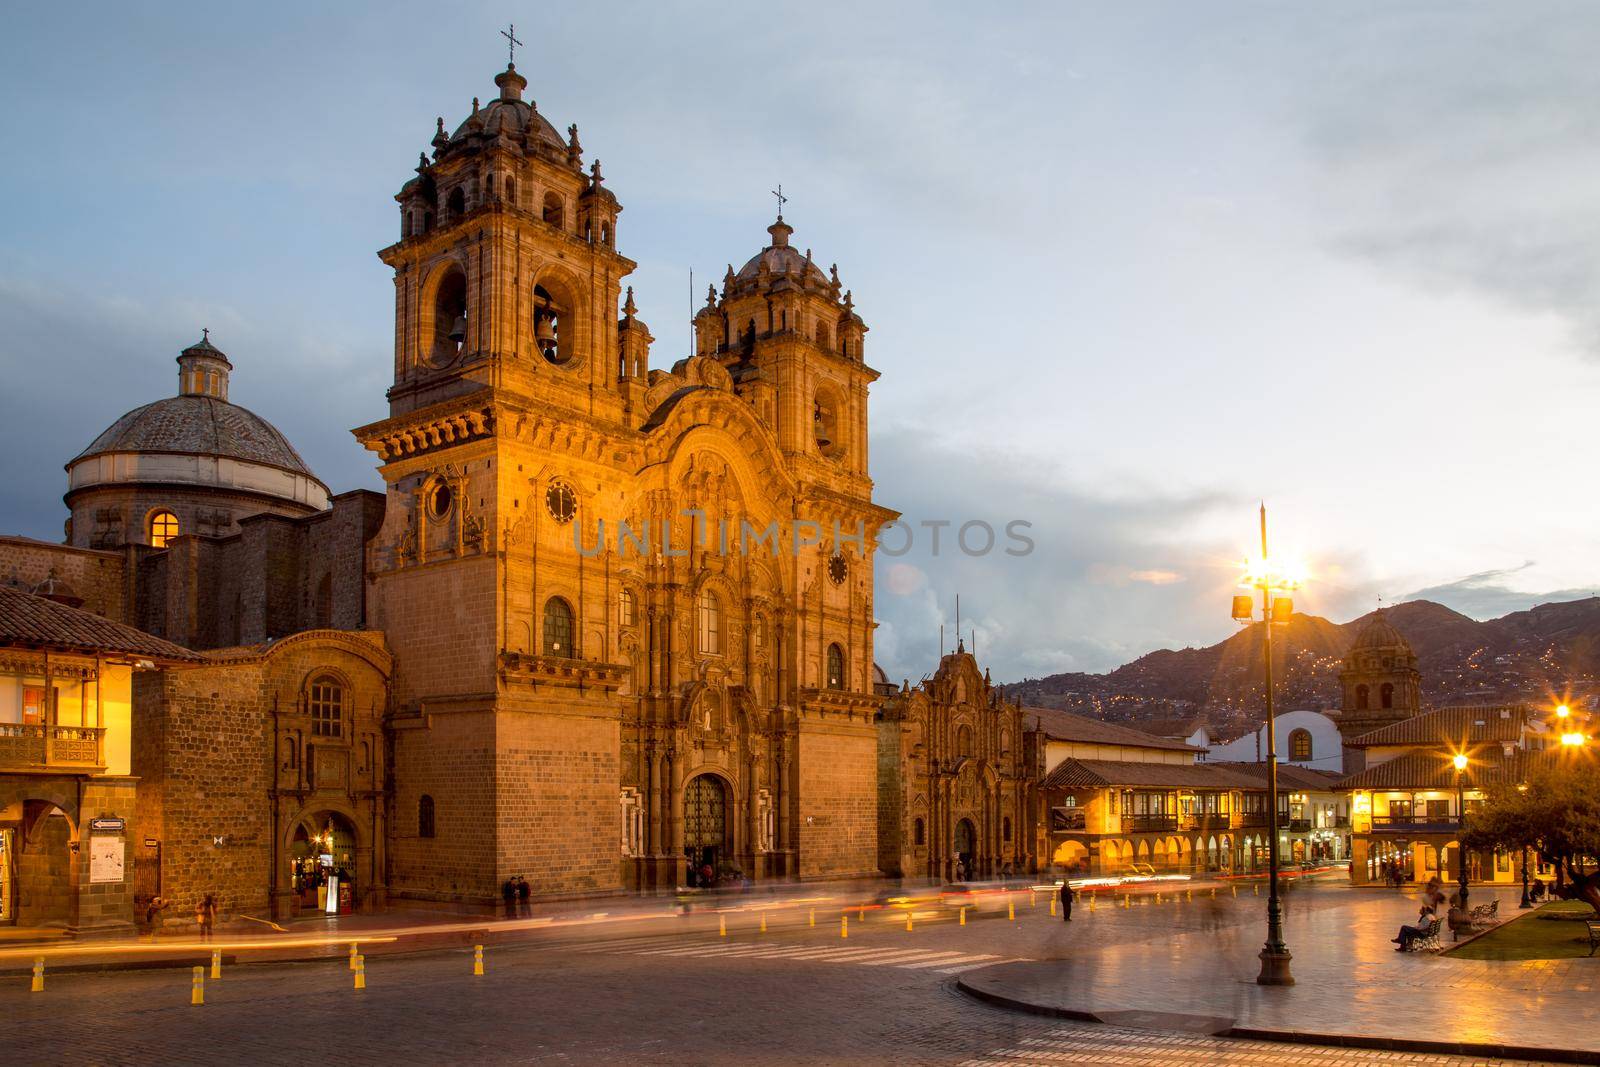 Cusco, Peru - October 06, 2015: The Catholic Church at the main plaza in the historic city centre